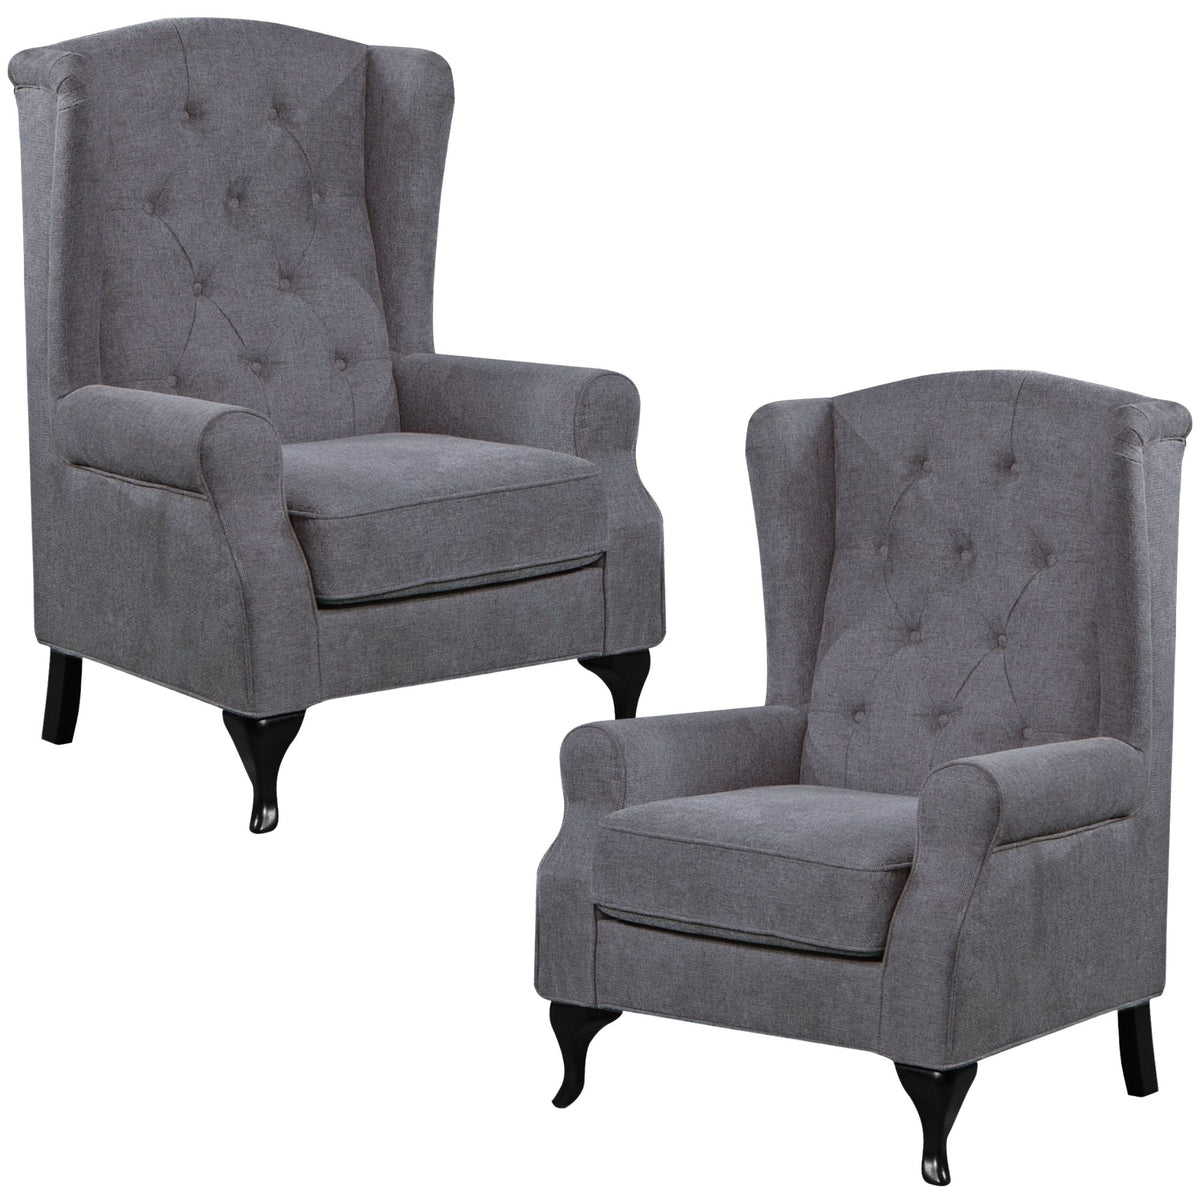 Kiho Chesterfield Wing Back Fabric Sofa Chair in Grey Set - 2 Pieces - Notbrand